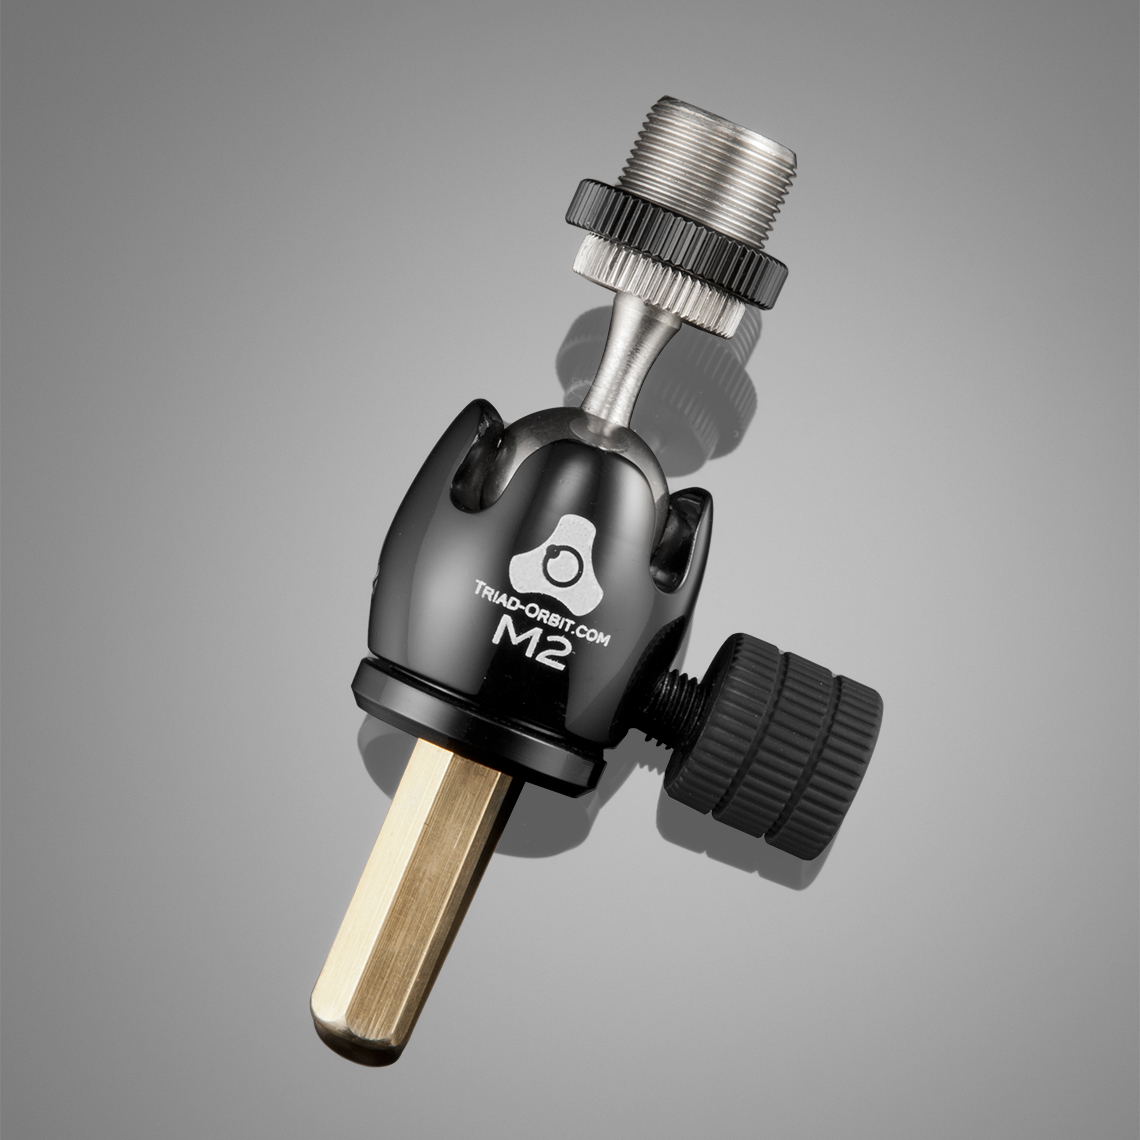 M2 orbital adapter features the exclusive Compass Point™ ball swivel housing that solidly secures microphones, cameras, and lights in position for precise directionality.